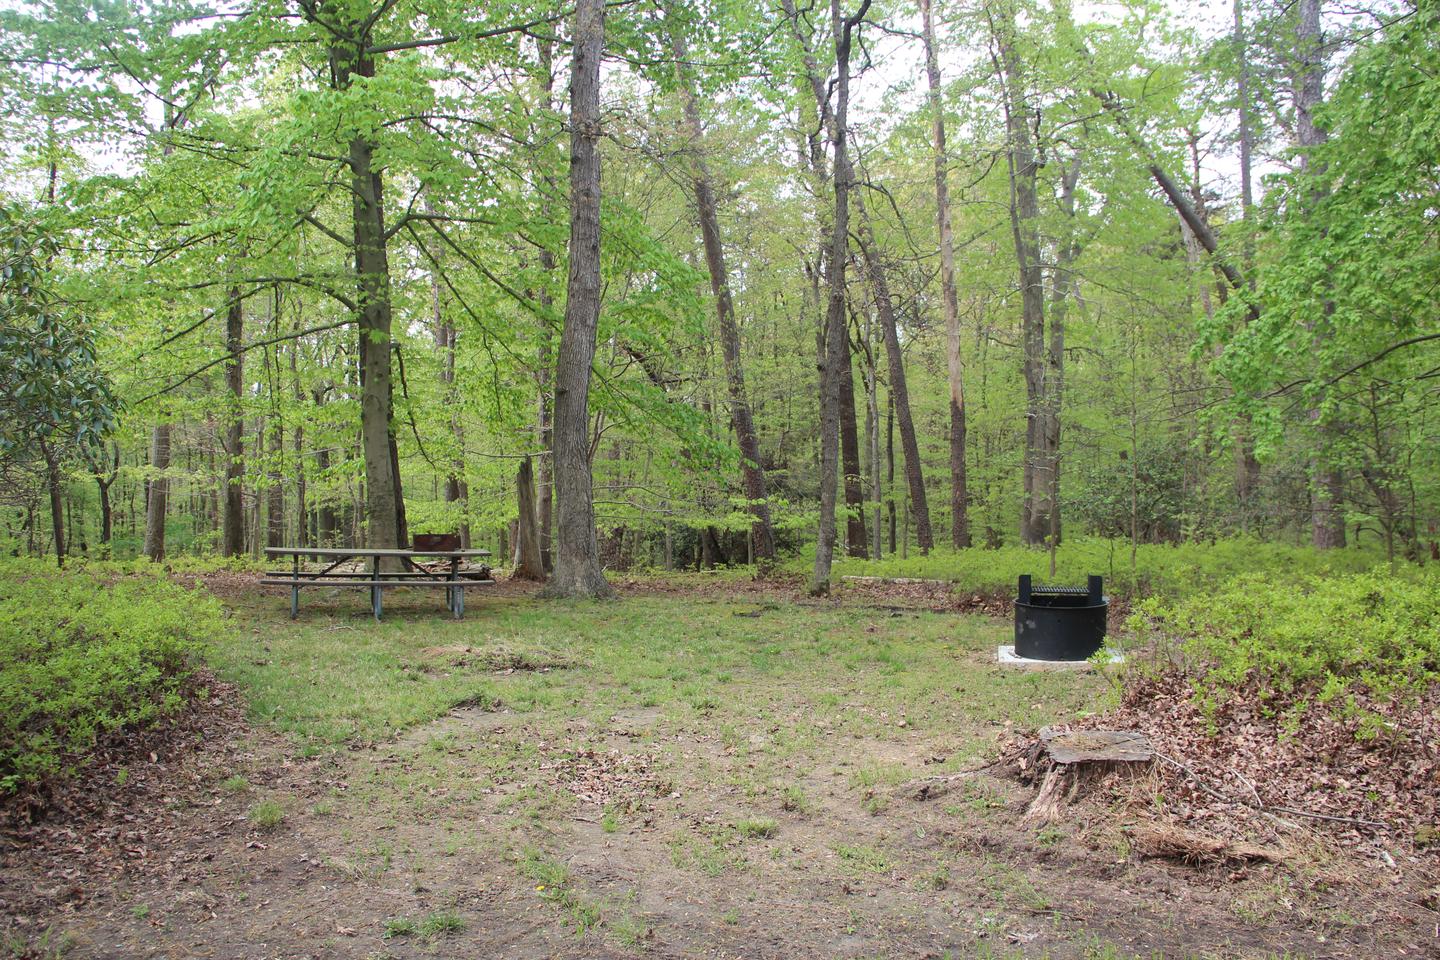 C86 C Loop of the Greenbelt Park Maryland campground